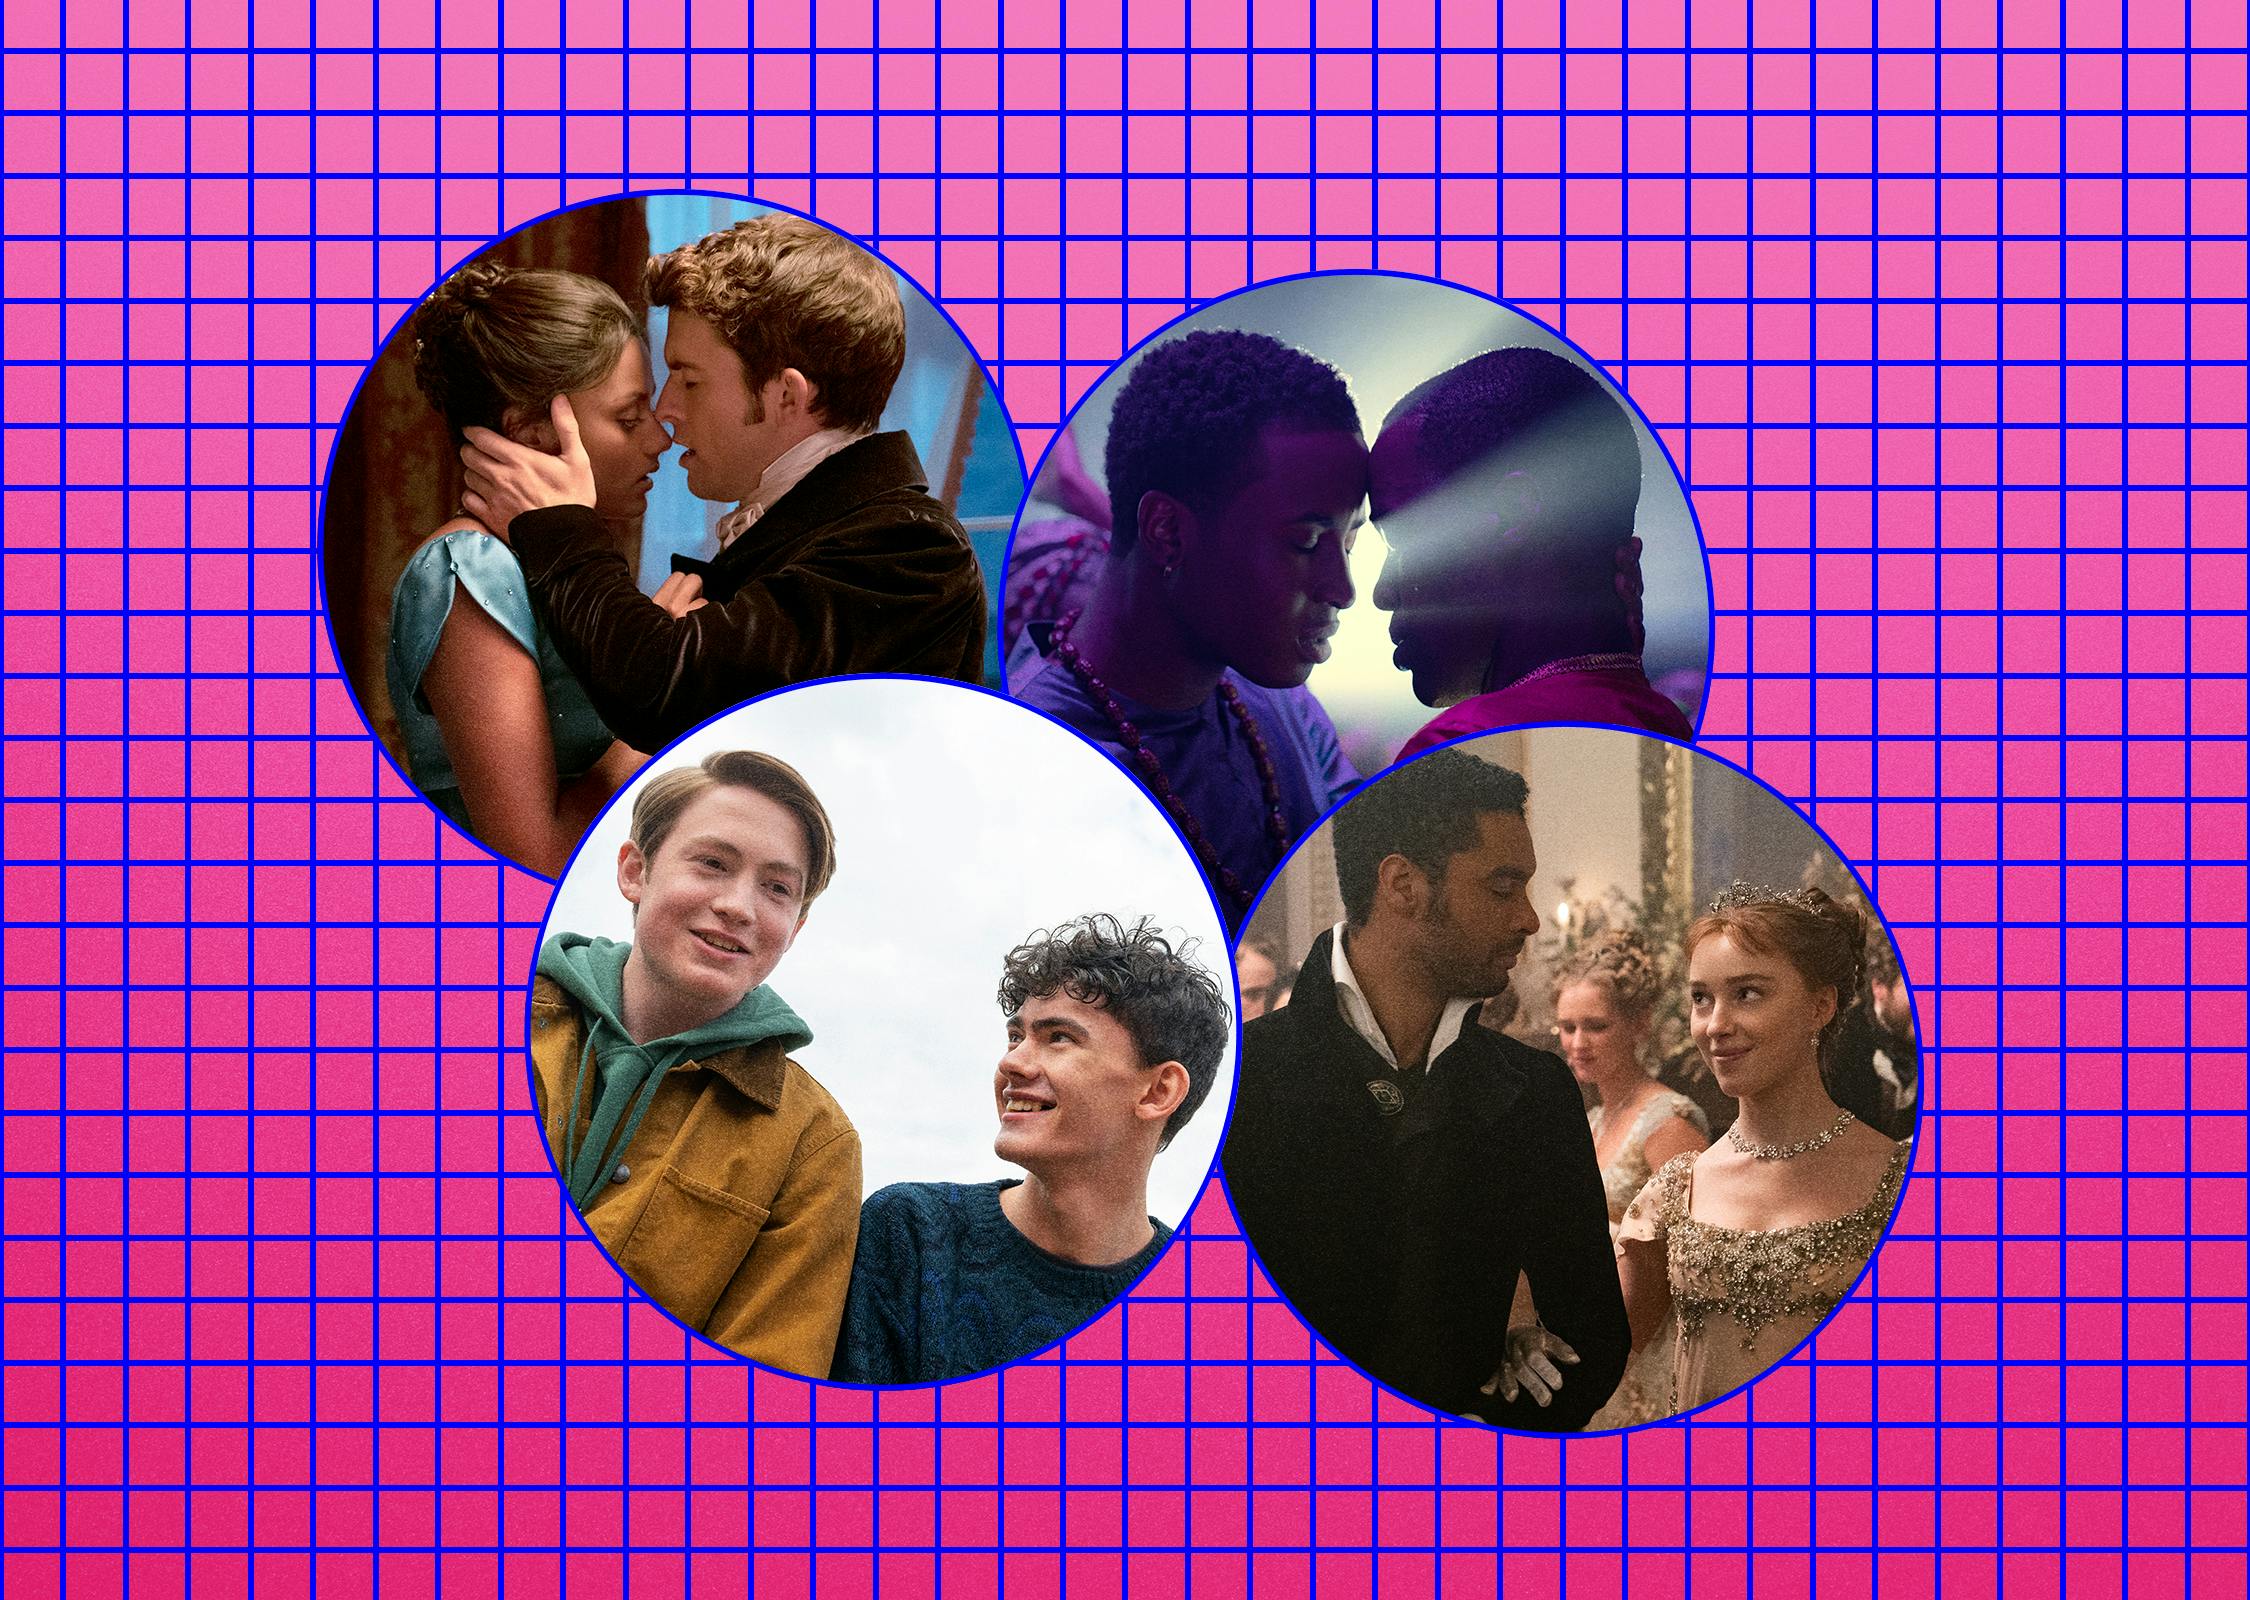 Four windows into some of Netflix's steamiest shows. From top left to bottom right Antony Bridgerton and Kate Sharma are tortured in a will-they-wont-they embrace in Bridgerton; Eric Effiong embraces Oba in a rave-lit shot in Sex Education; Heartstopper's Nick and Charlie smile and look giddy with a crush; another shot from Bridgerton shows Daphne and the Duke wake through a ball. 